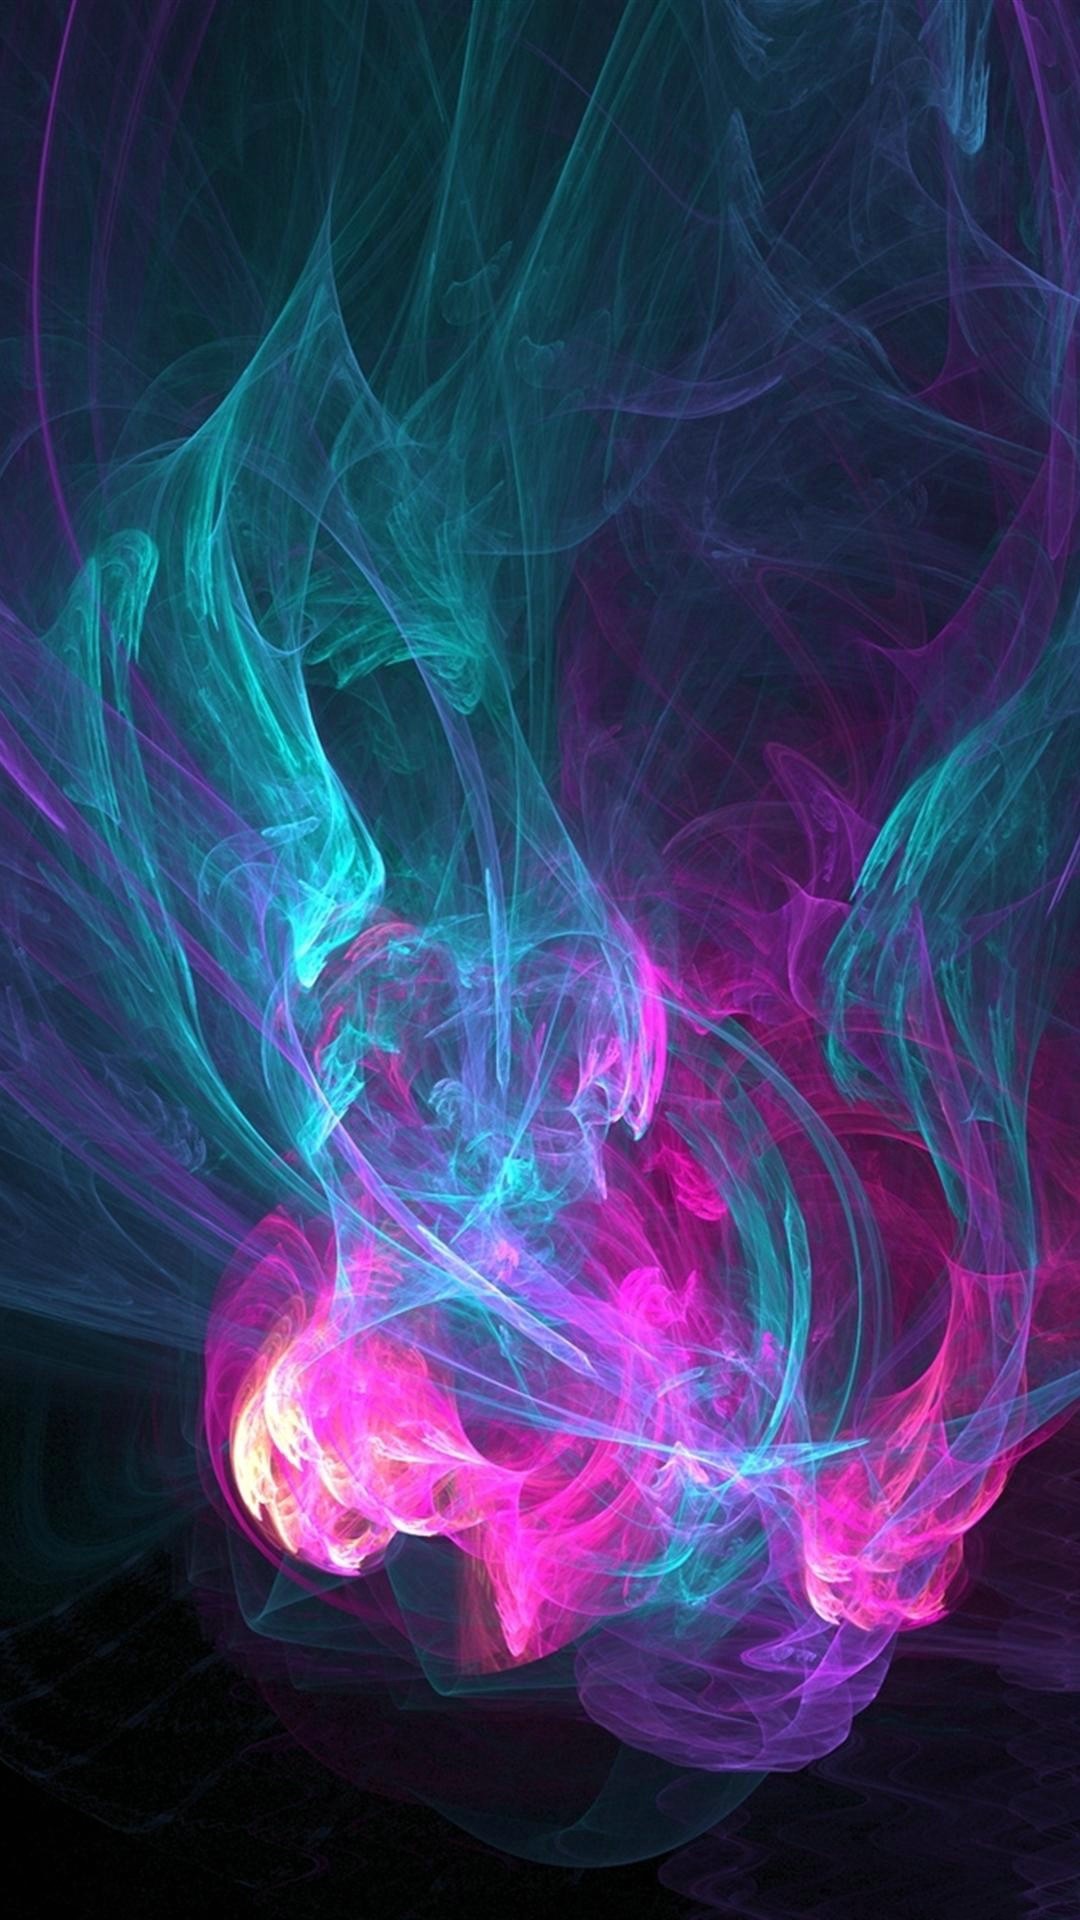 1080x1920 Abstract Cool Pink Iphone Wallpaper.